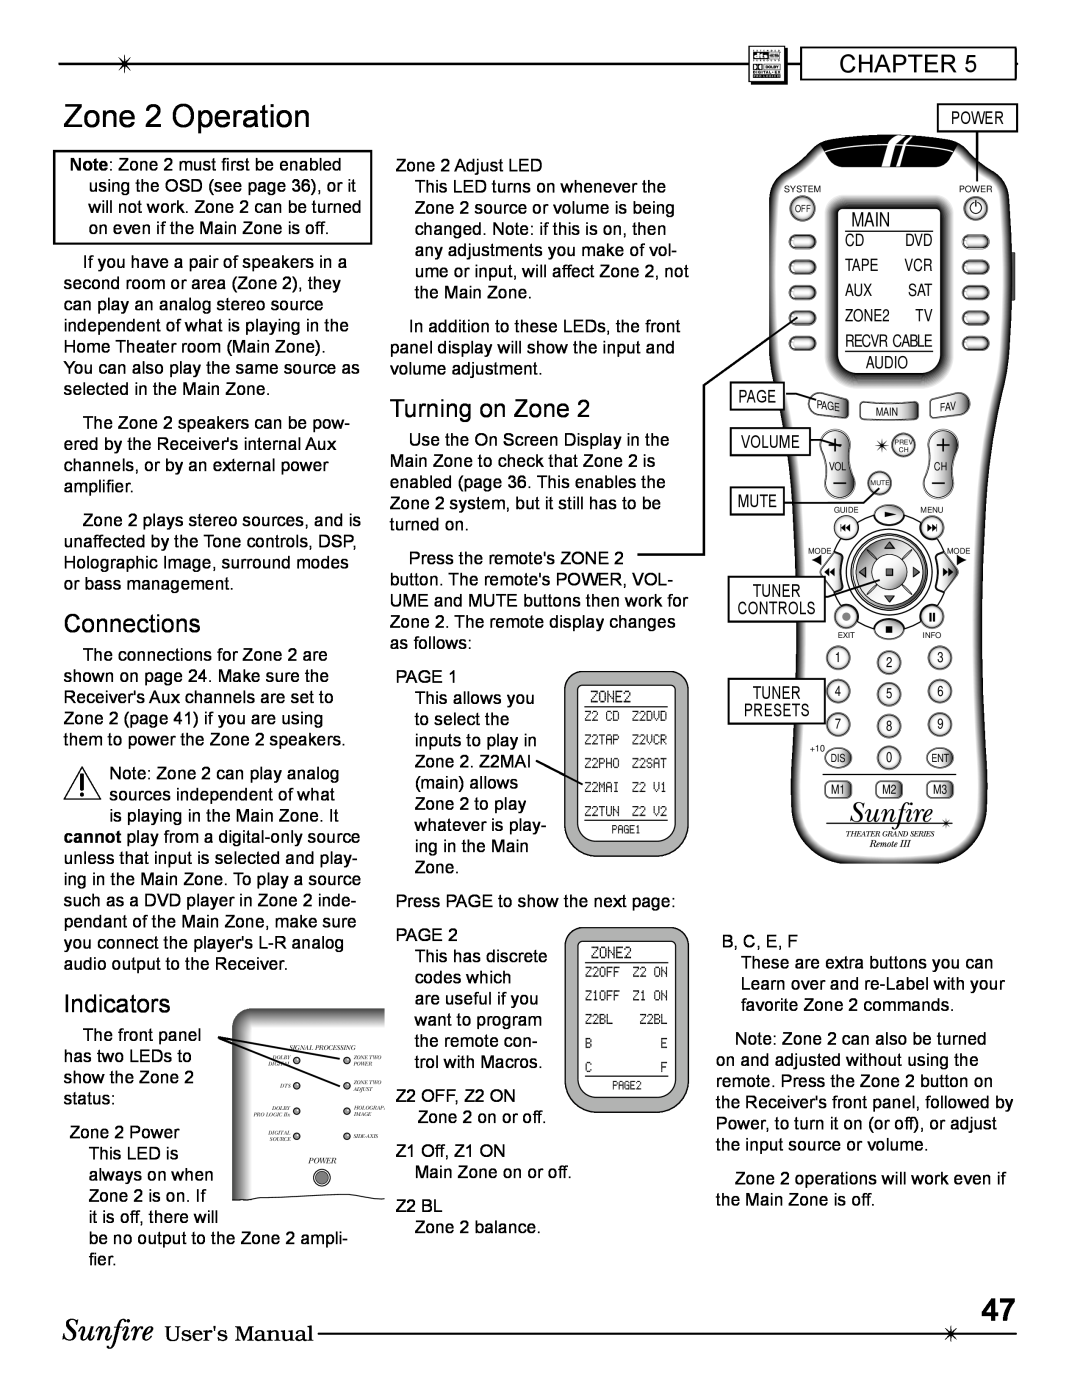 Sunfire Radio manual Zone 2 Operation, Turning on Zone, Connections, Indicators, Chapter, Main 